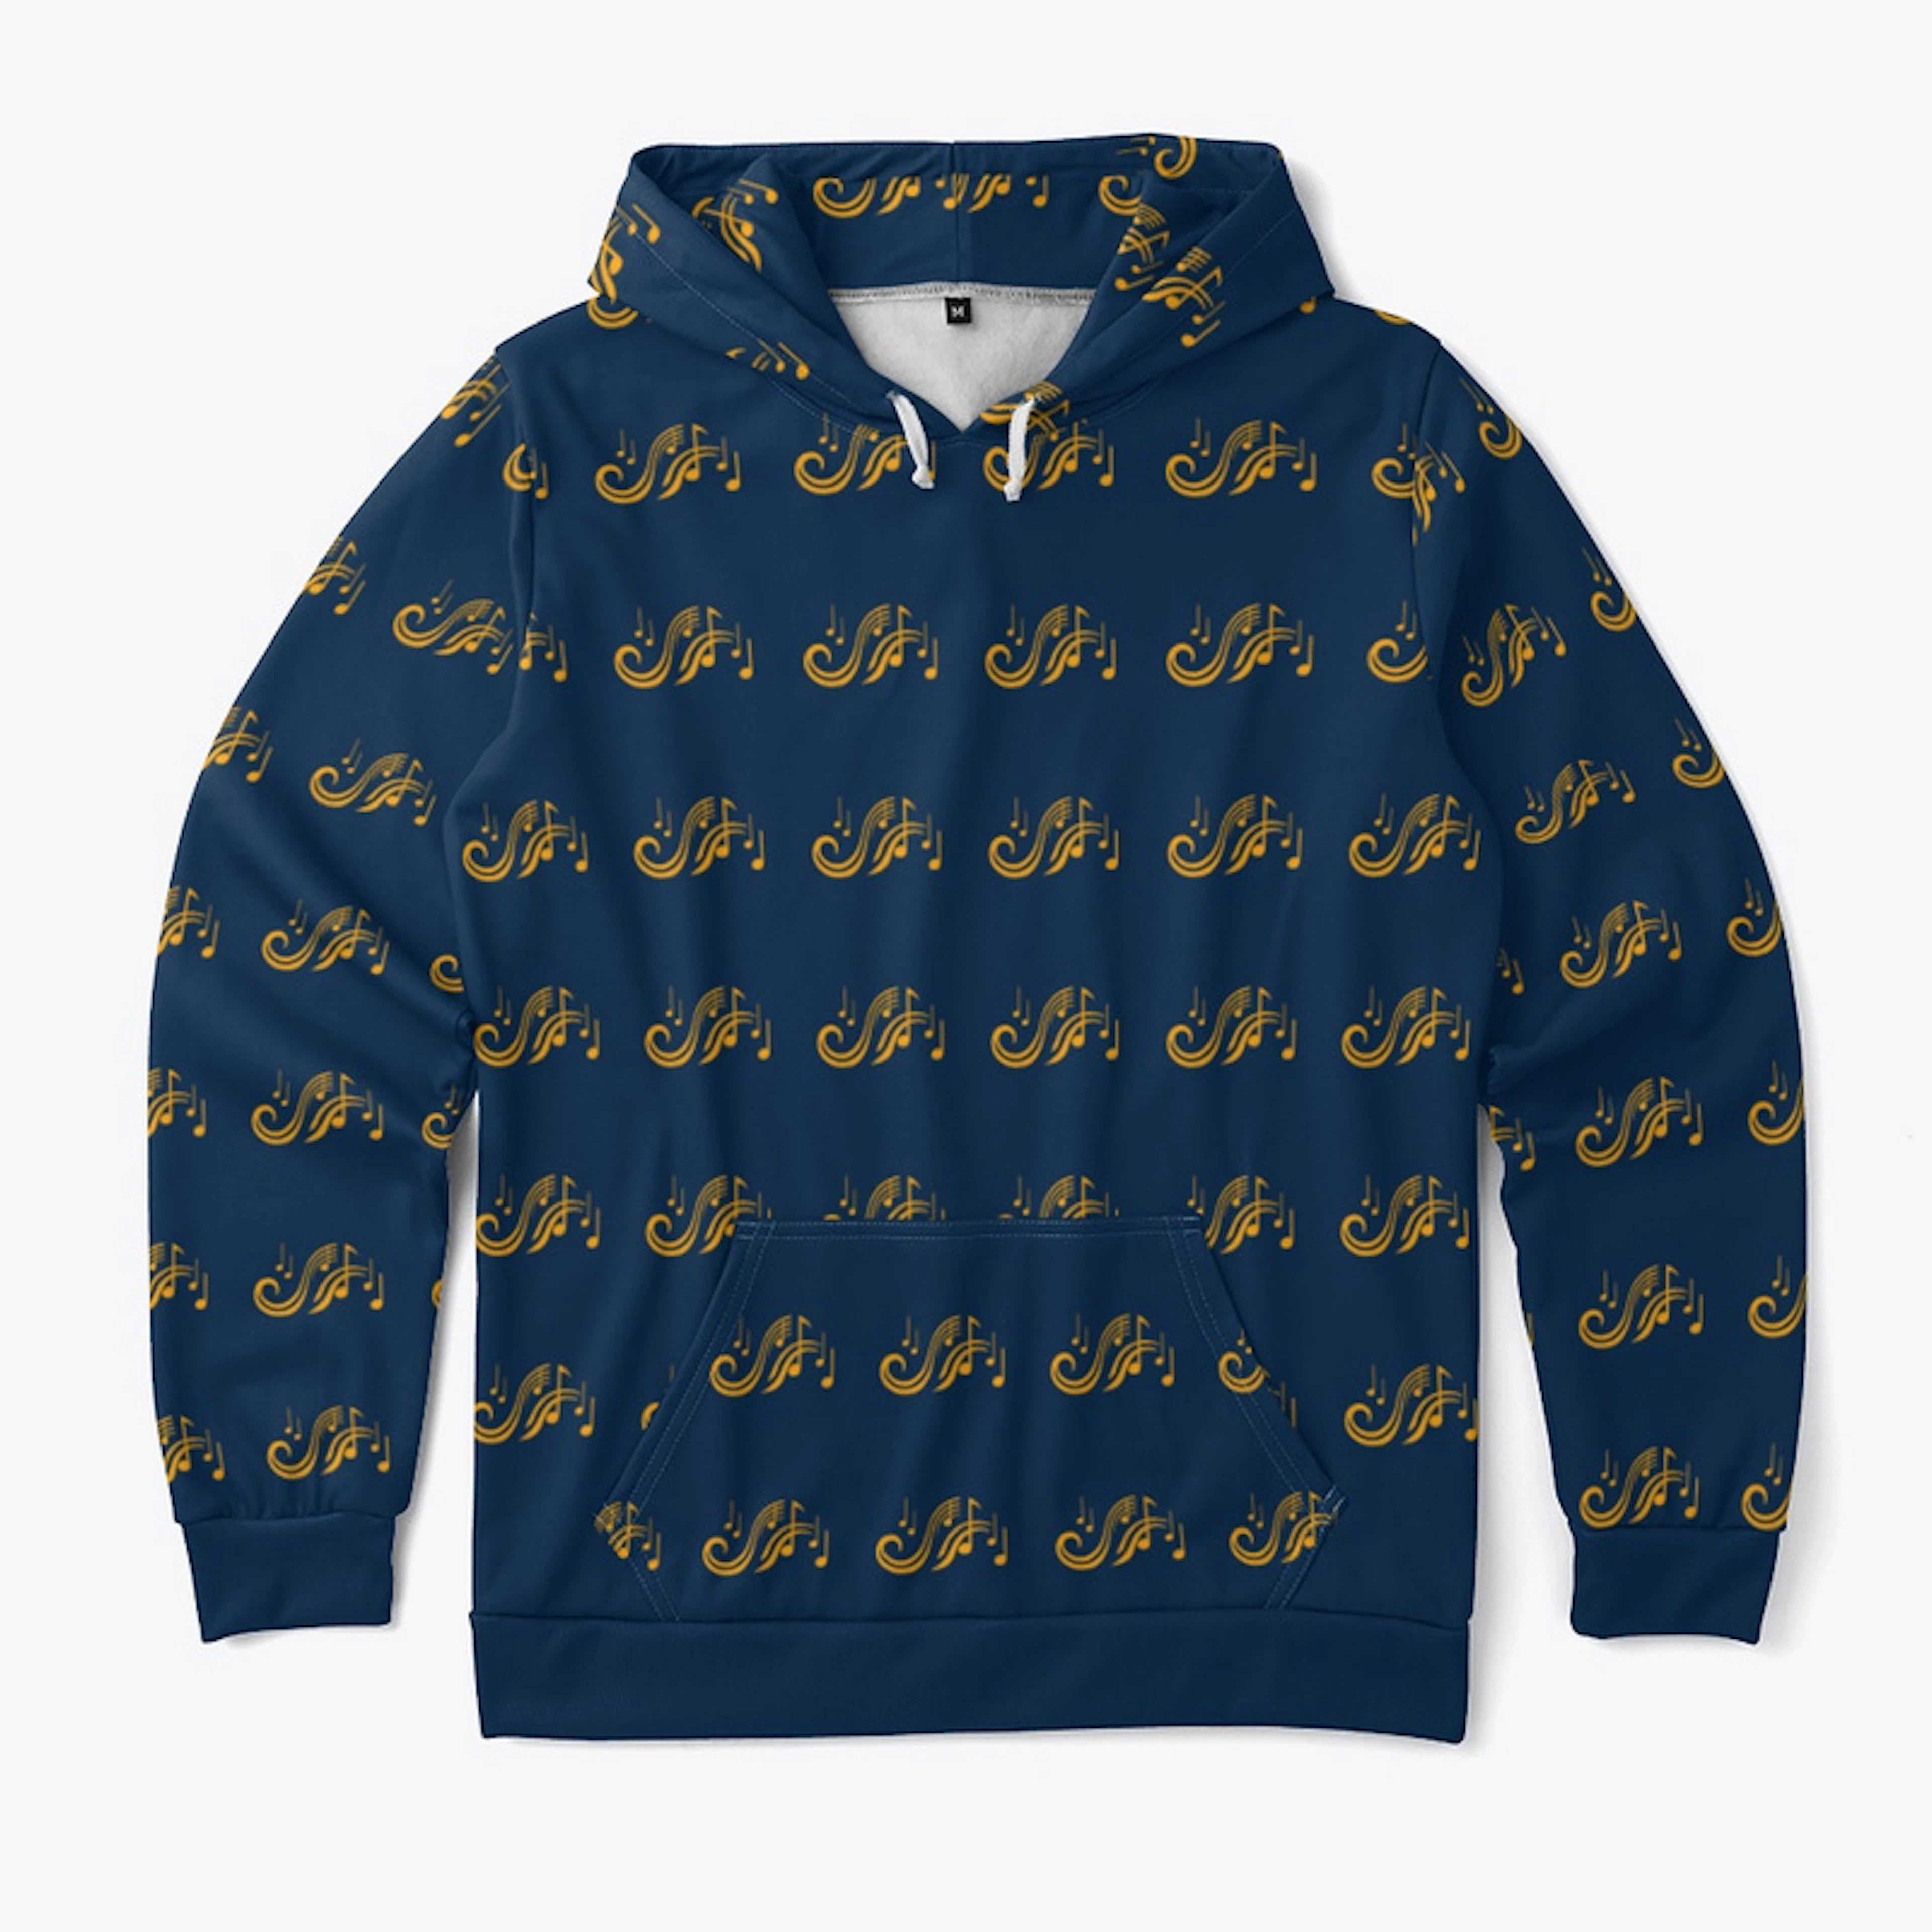 Melodic All-Over Print (Navy Blue)